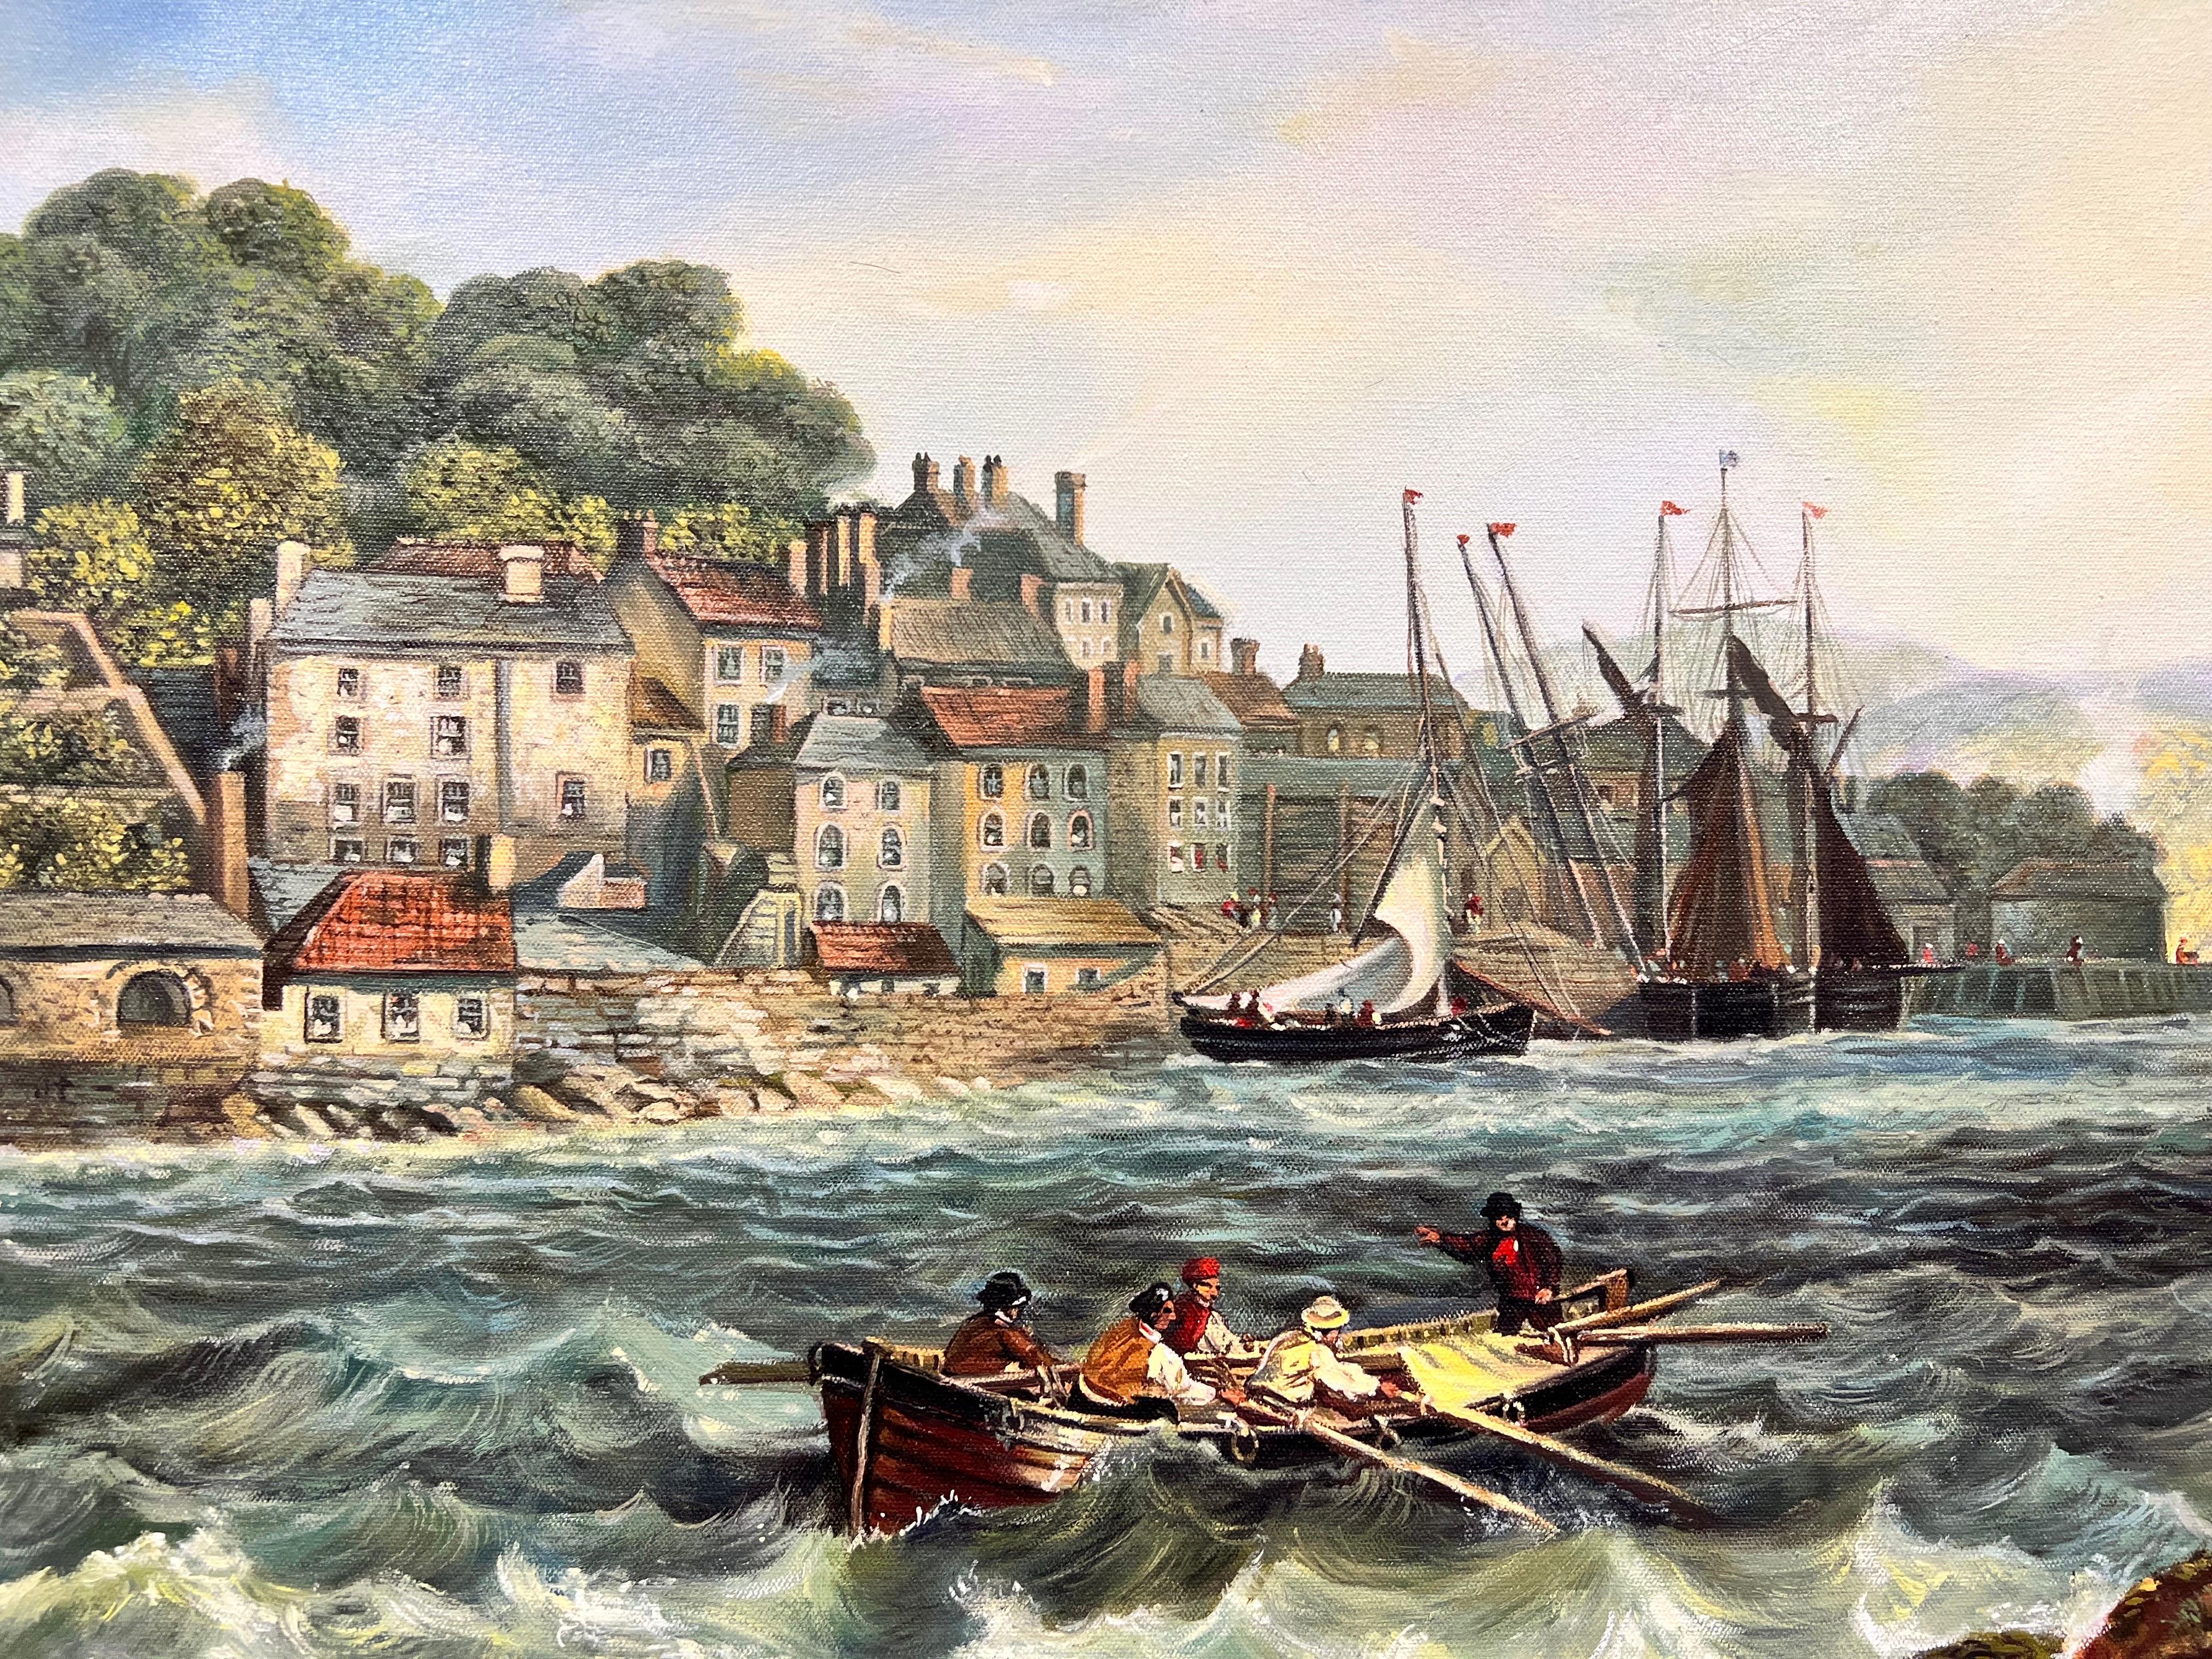 The Harbour
British School, 20th century
signed bottom right
oil on canvas, framed
framed: 28 x 37 inches
canvas: 20 x 30 inches
private collection, England
the painting is in overall very good and sound condition. 
 